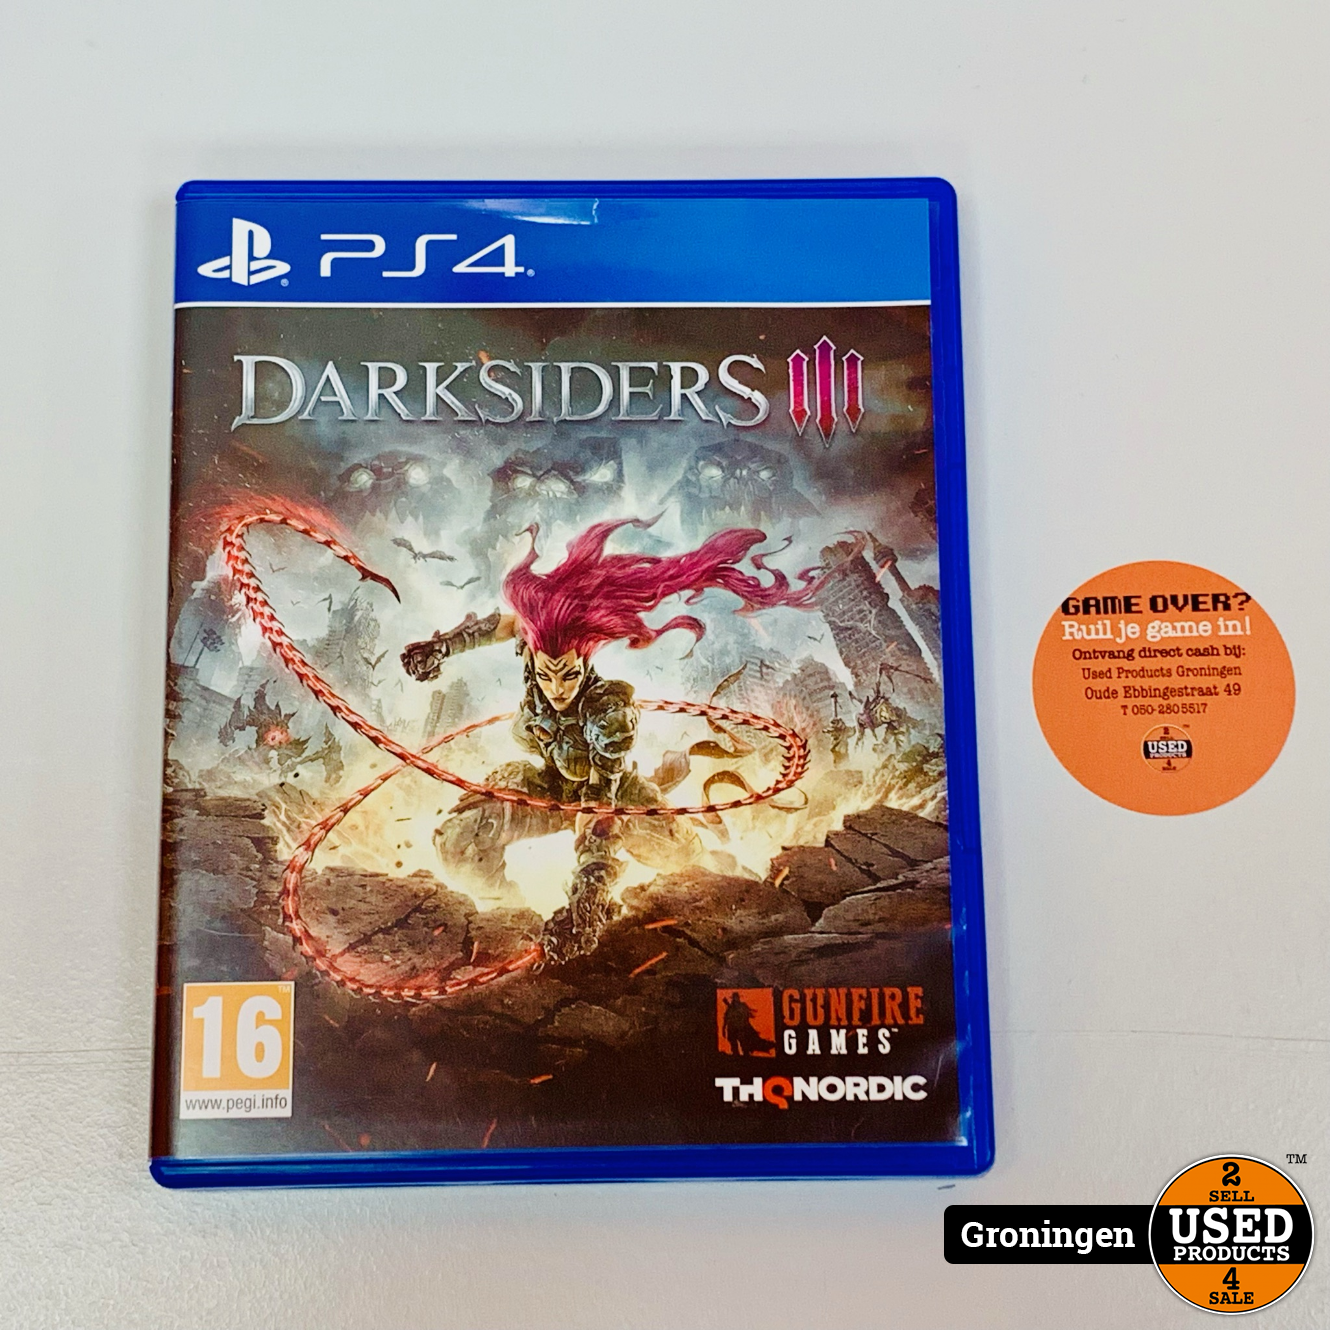 Sony Ps4 Ps4 Darksiders 3 Used Products Groningen